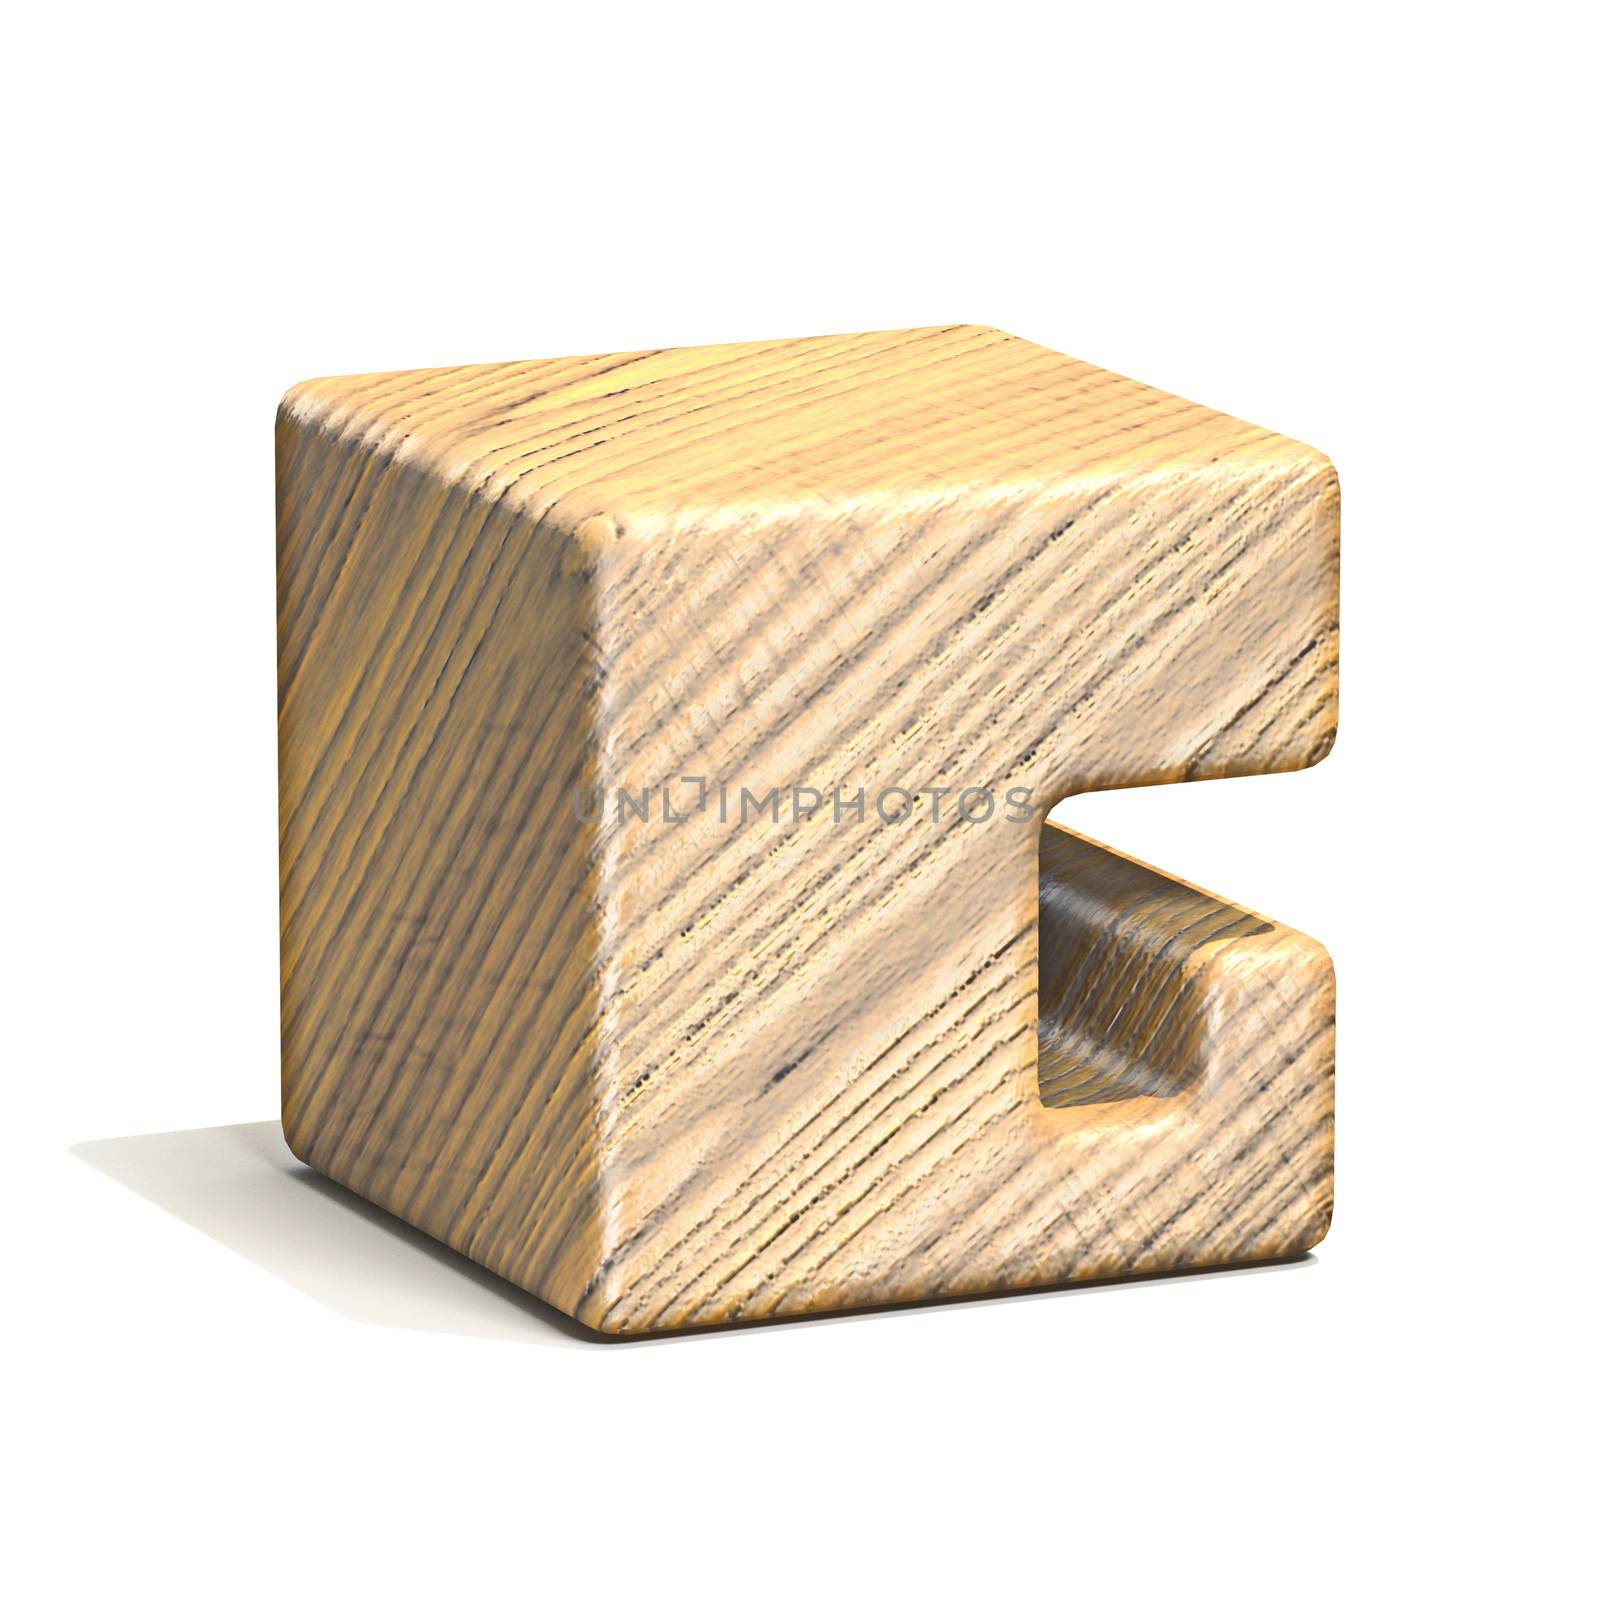 Solid wooden cube font Letter G 3D render illustration isolated on white background